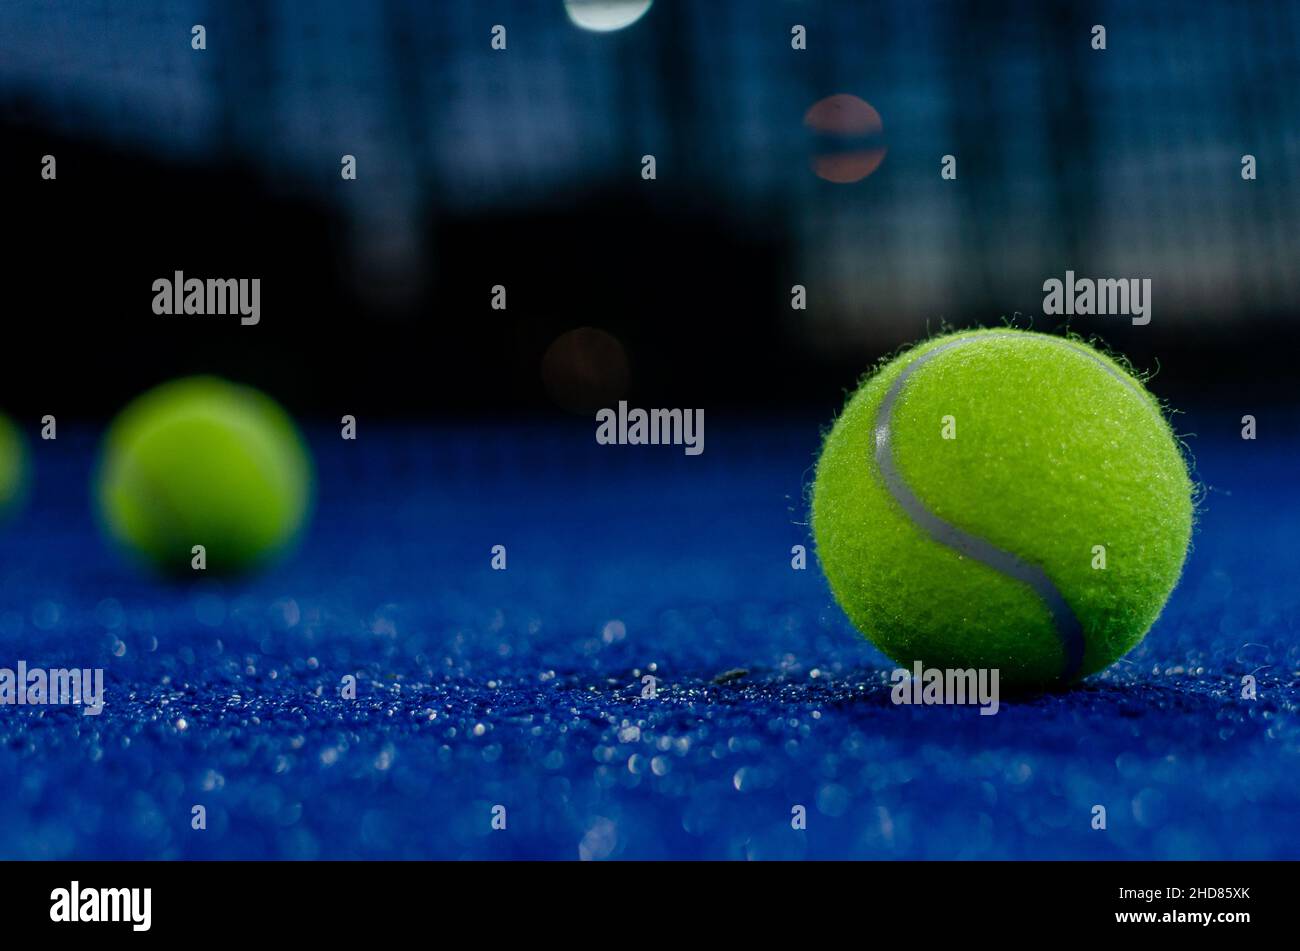 Selective focus. Two paddle tennis balls on a blue paddle tennis court at night. Racket sports concept. Stock Photo